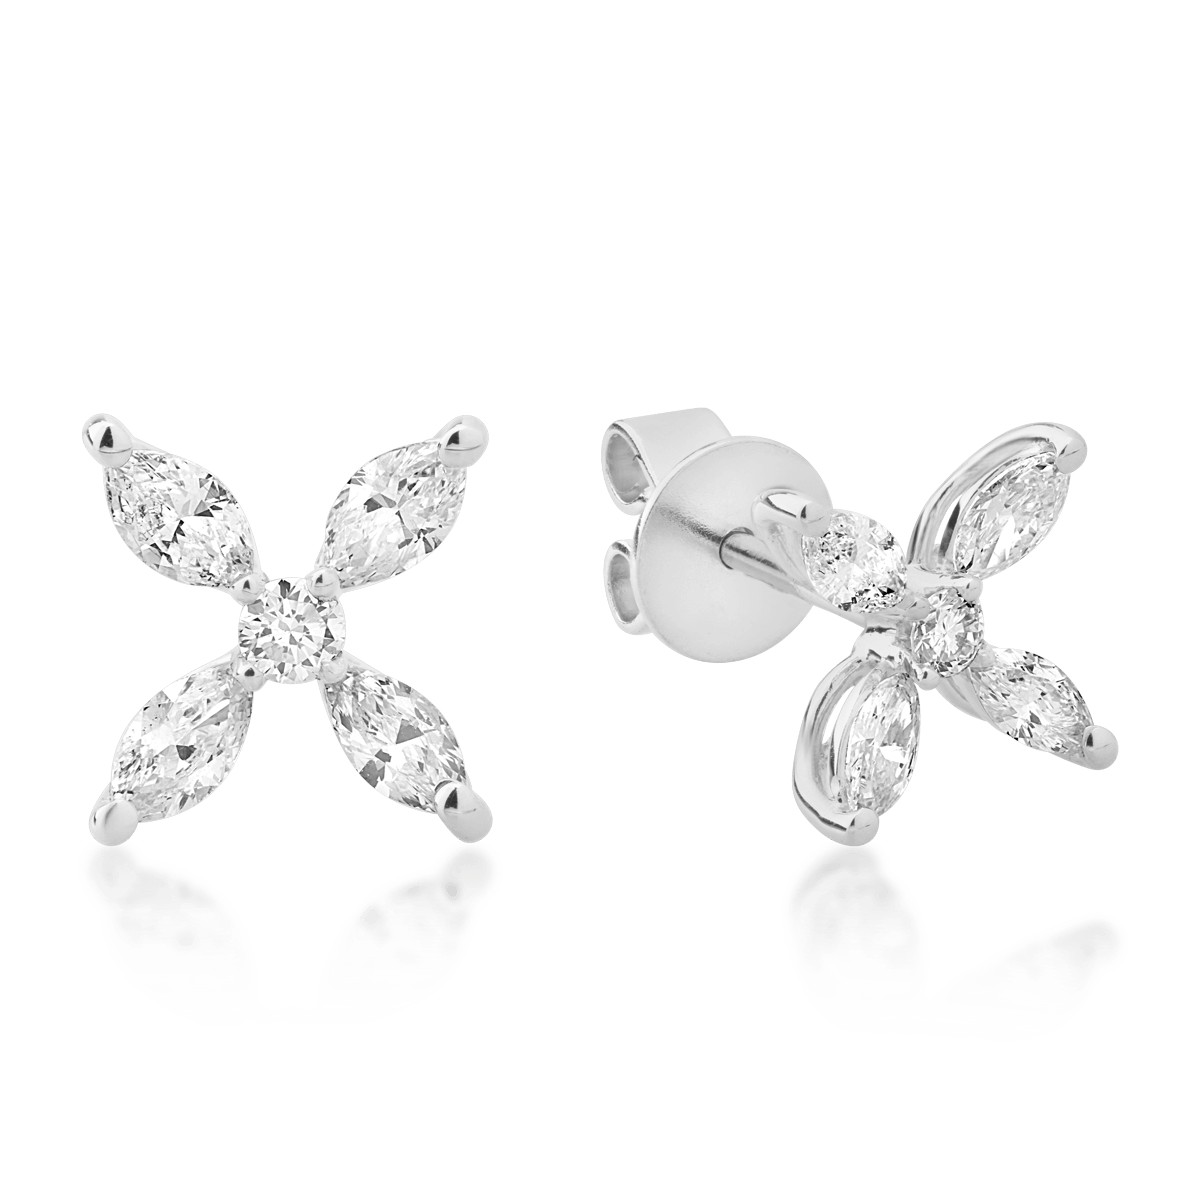 14K white gold earrings with diamonds of 0.54ct